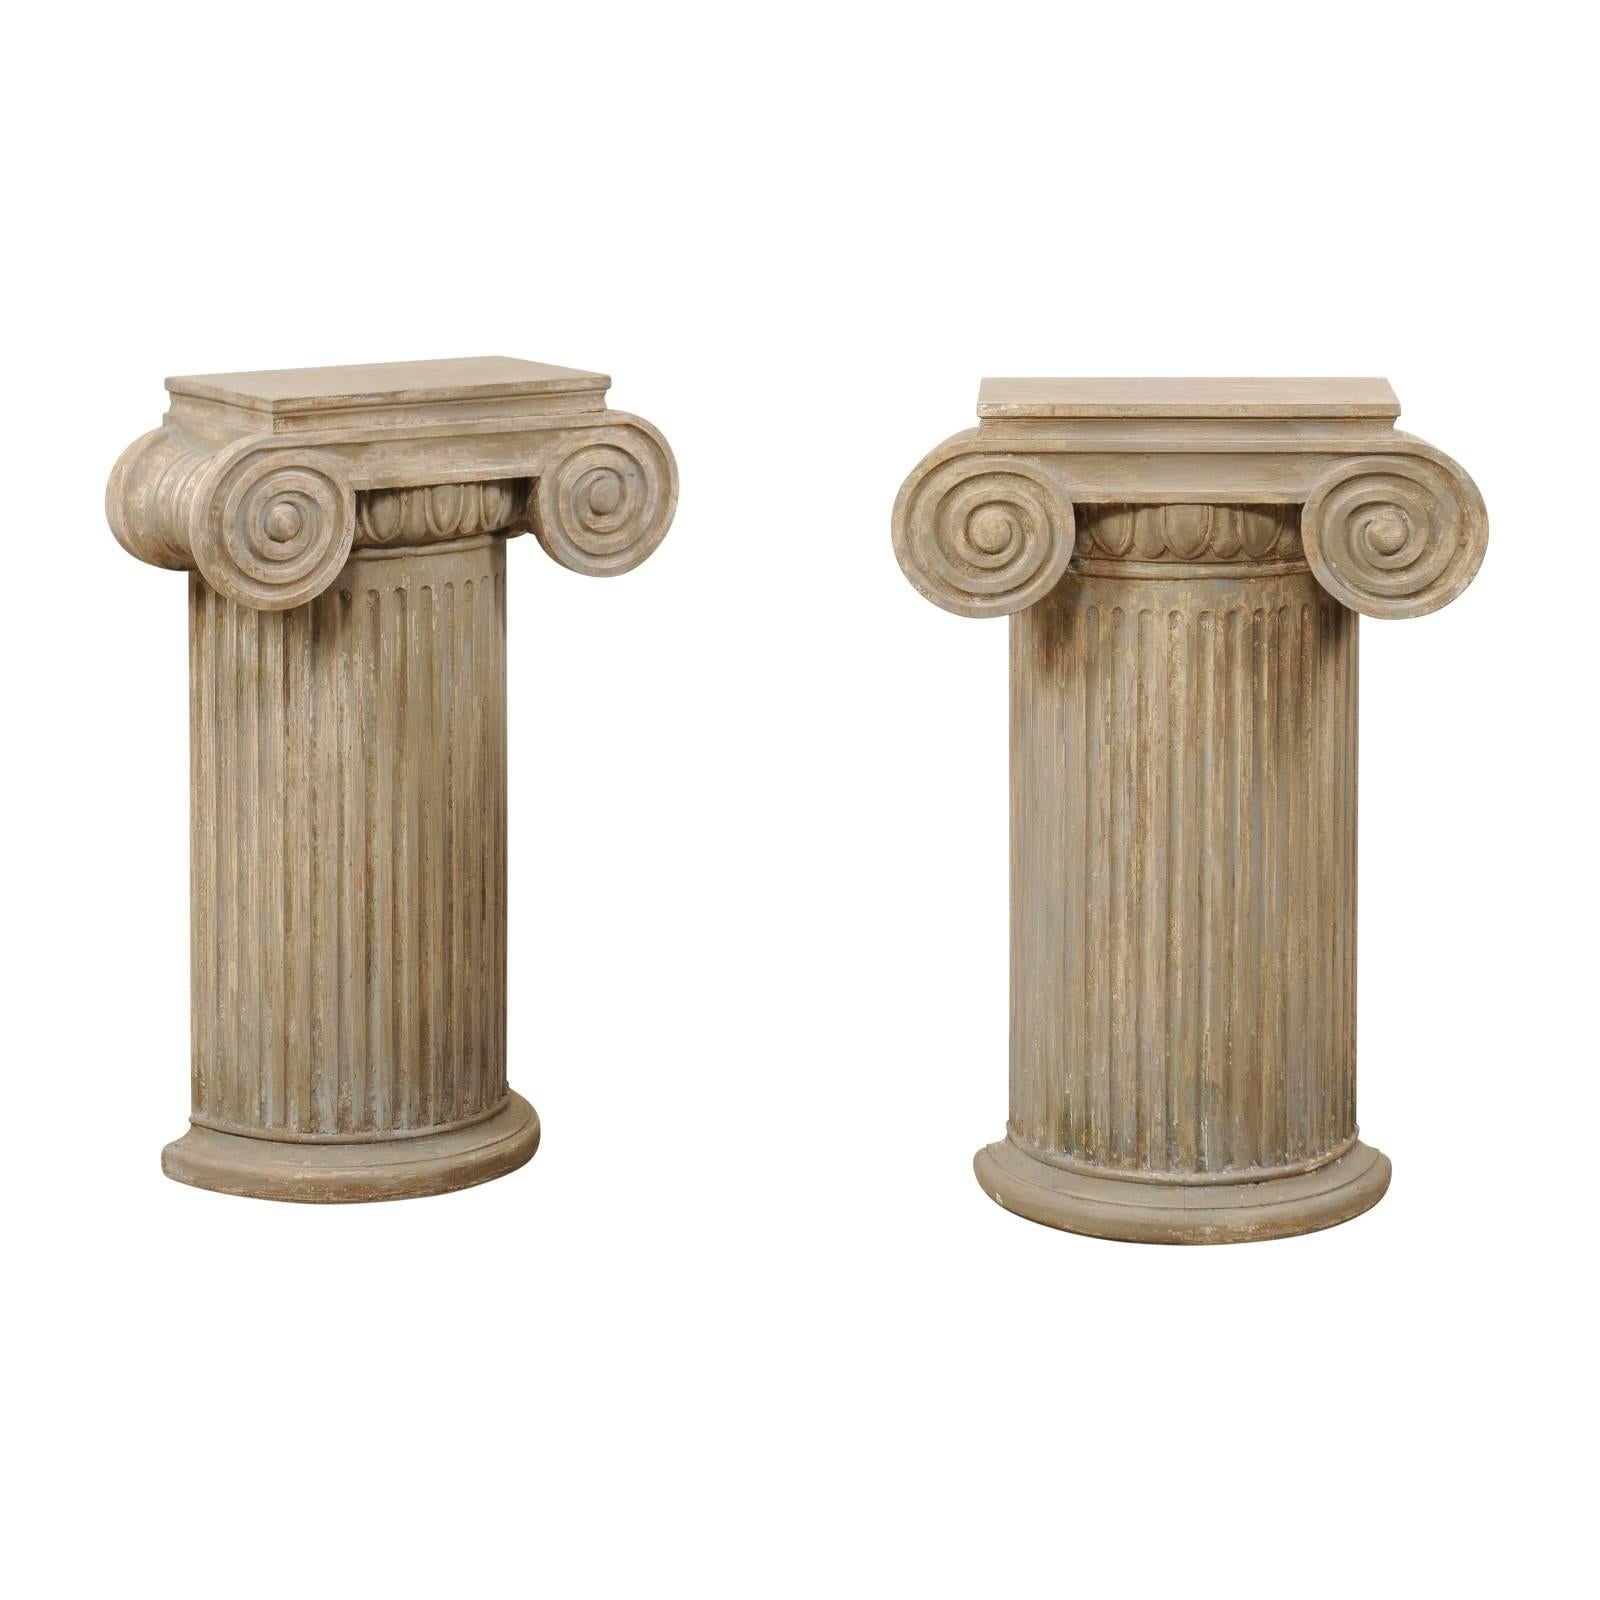 Pair of Vintage Carved Wood Ionic Fluted Column Pedestals with Neutral Finish